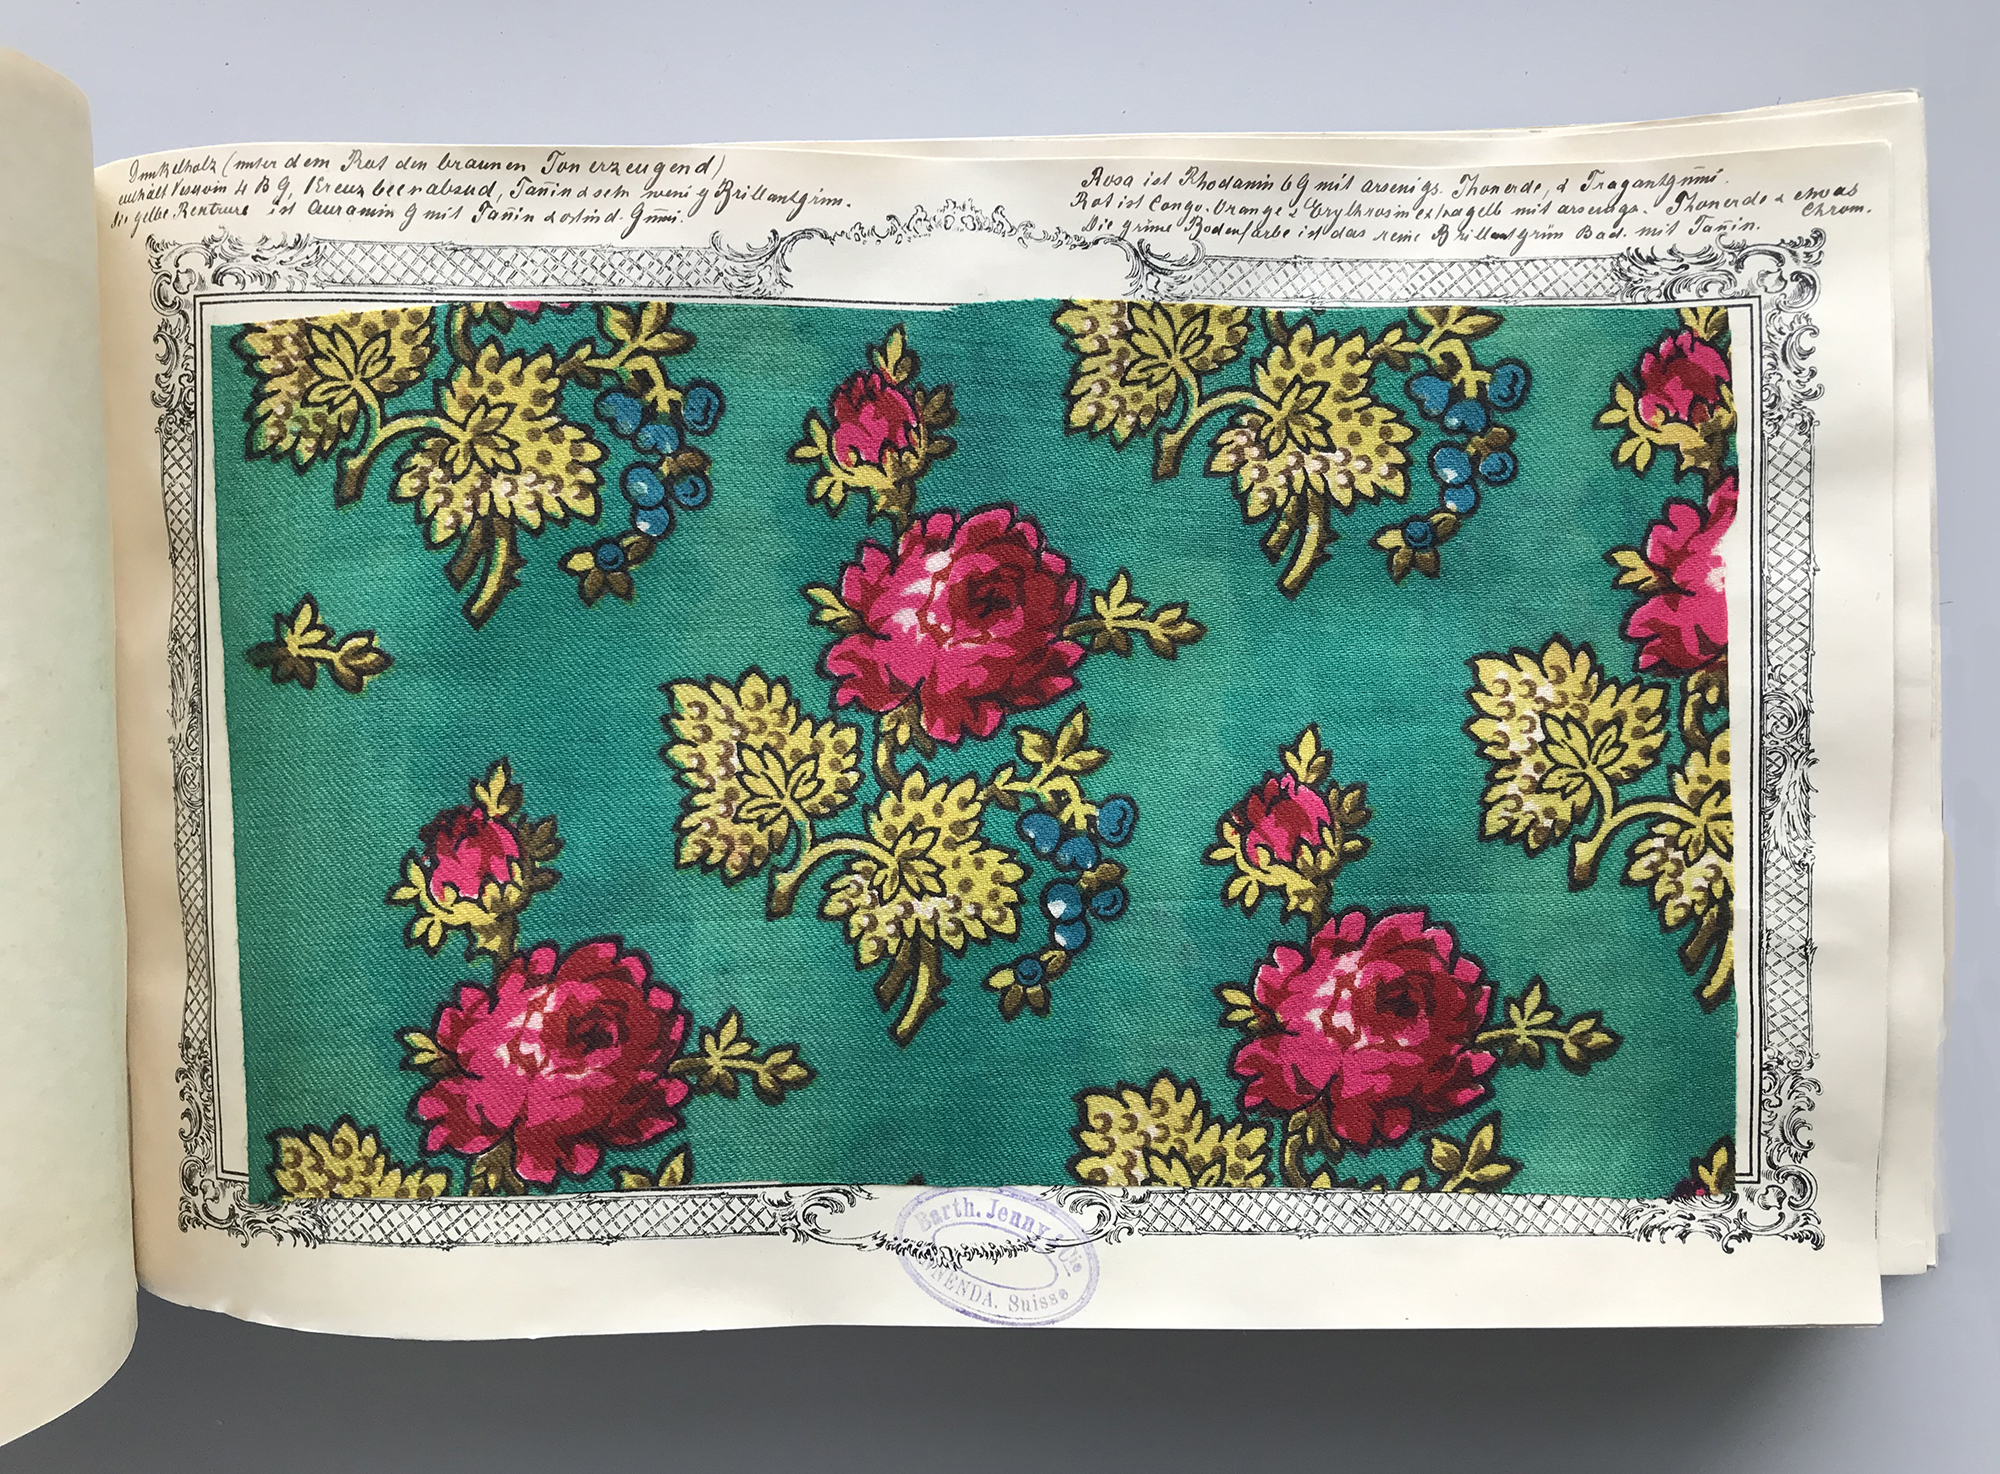 Example of a fabric pattern book of Adolf Jenny-Trümpy